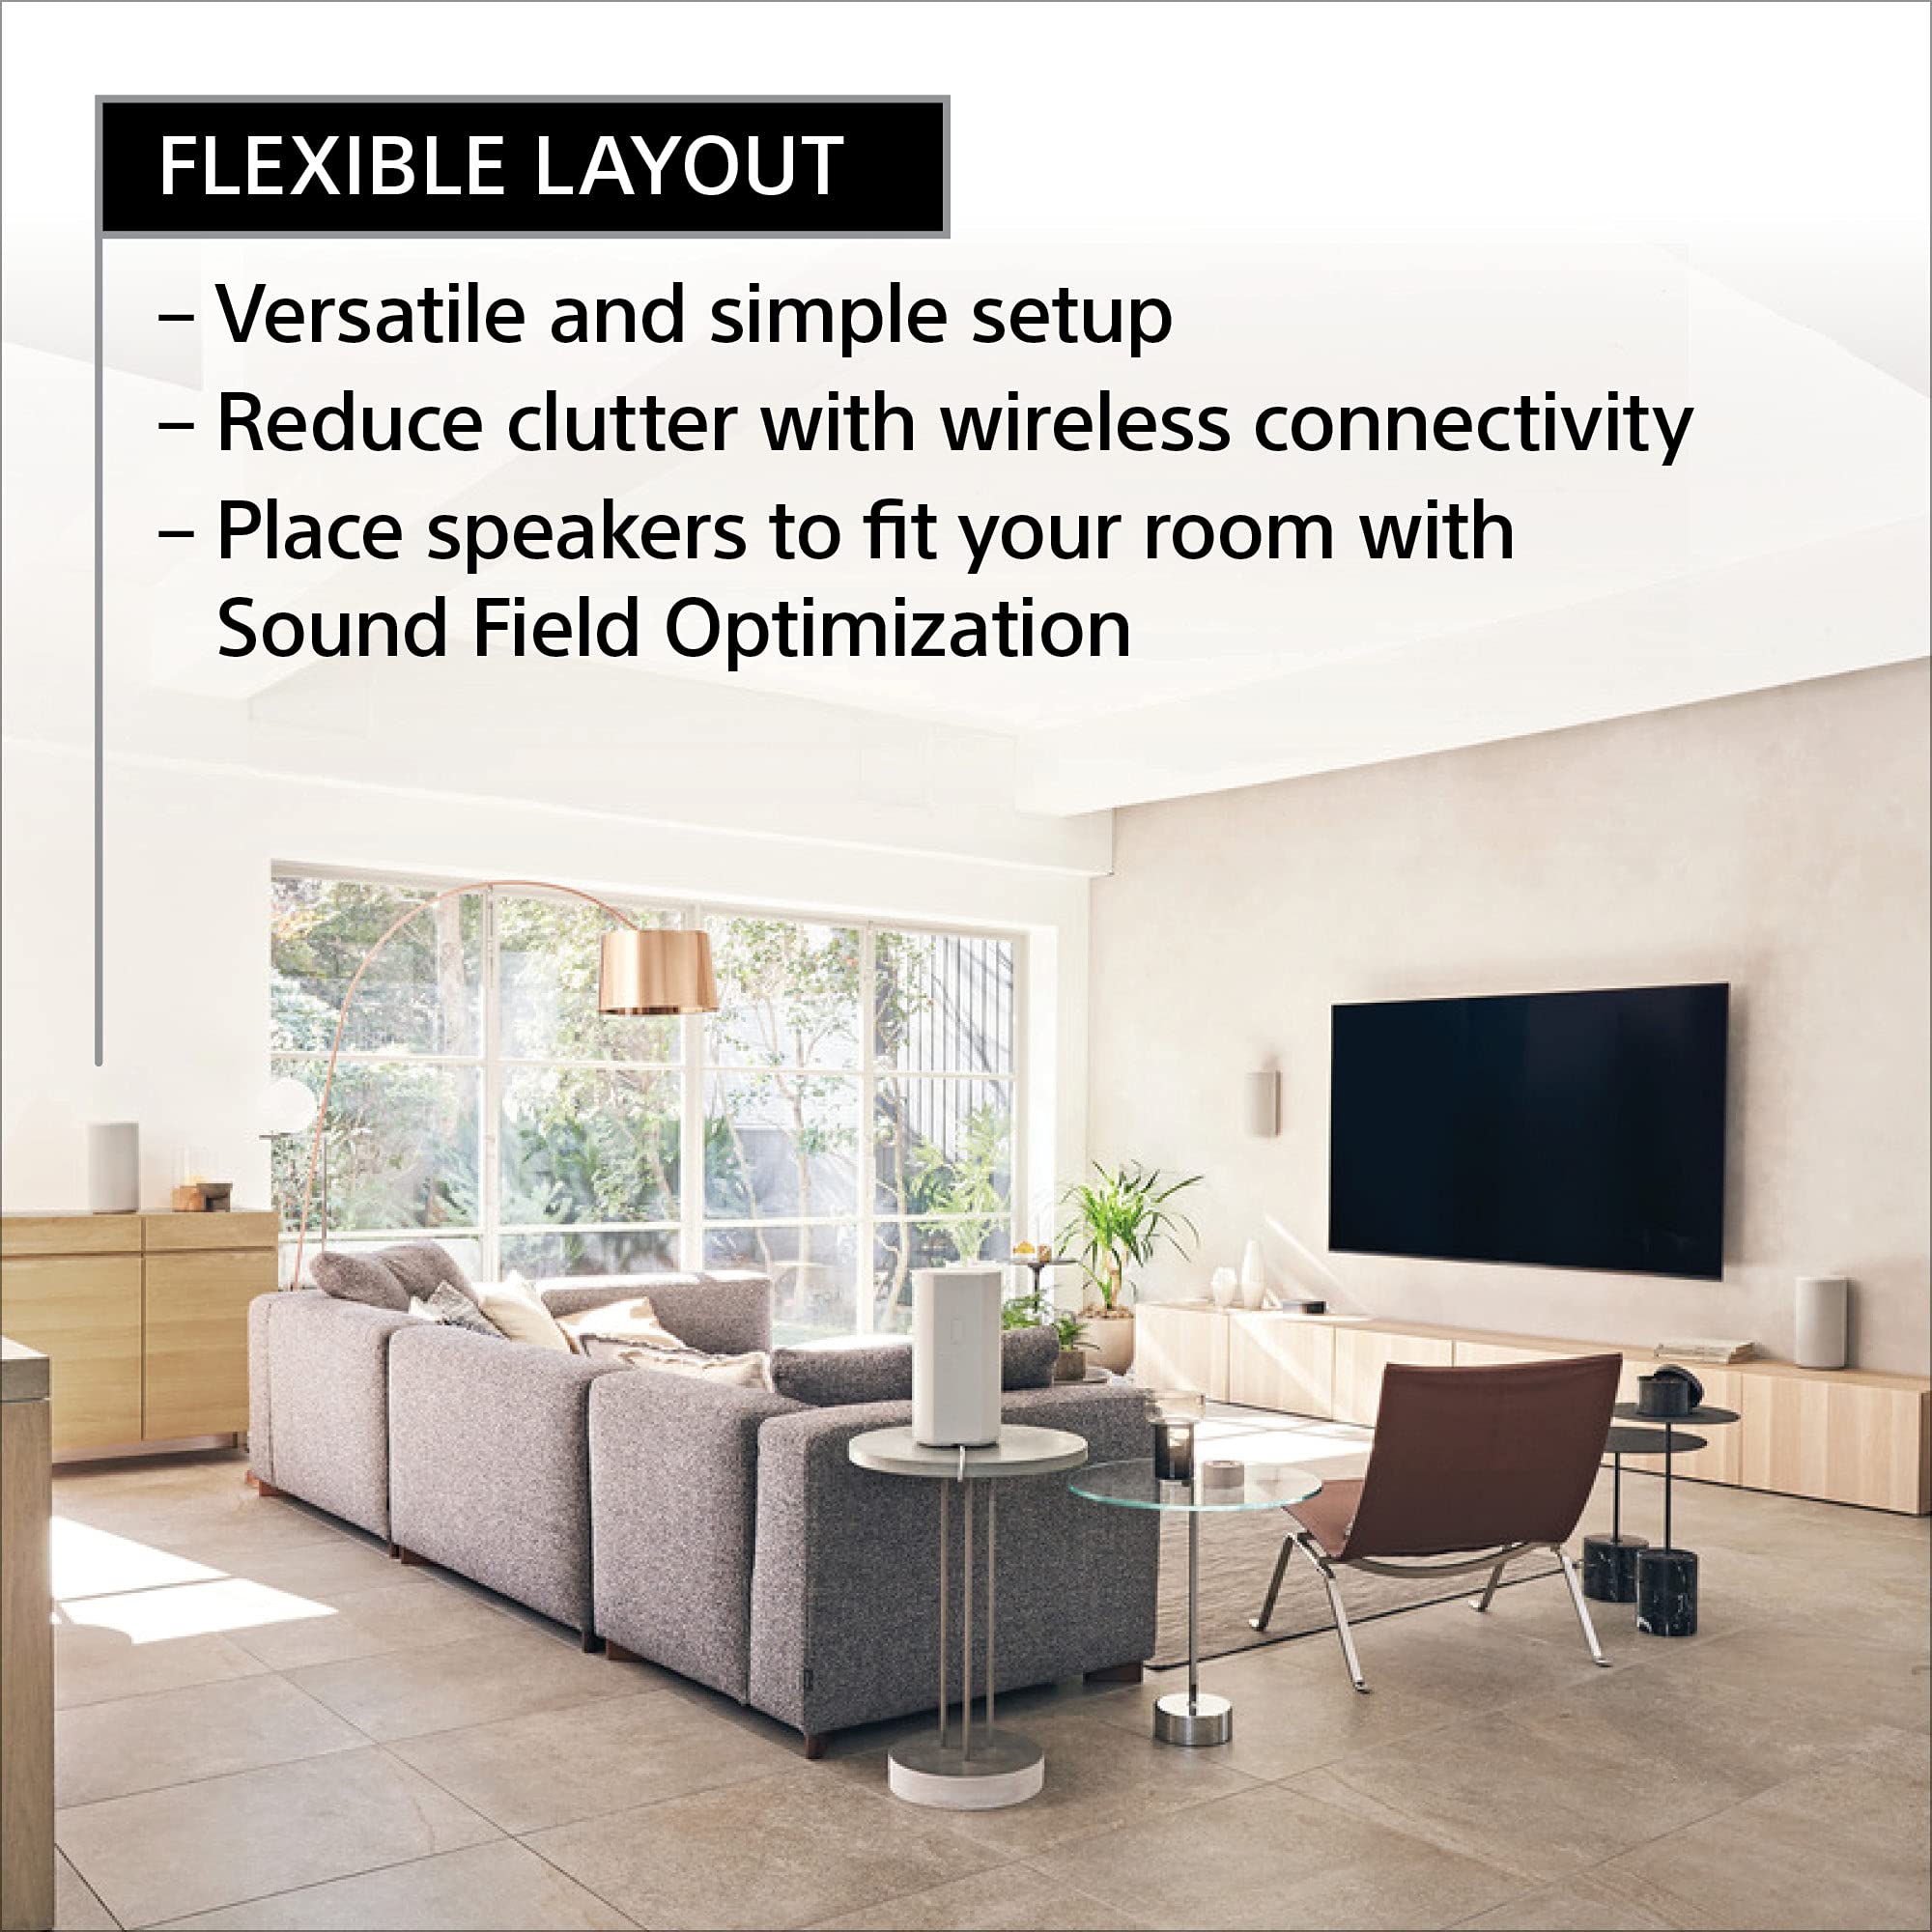 Sony HT-A9 7.1.4ch High Performance Home Theater Speaker System Multi-Dimensional Surround Sound Experience with 360 Spatial Sound Mapping, works with Alexa and Google Assistant,White